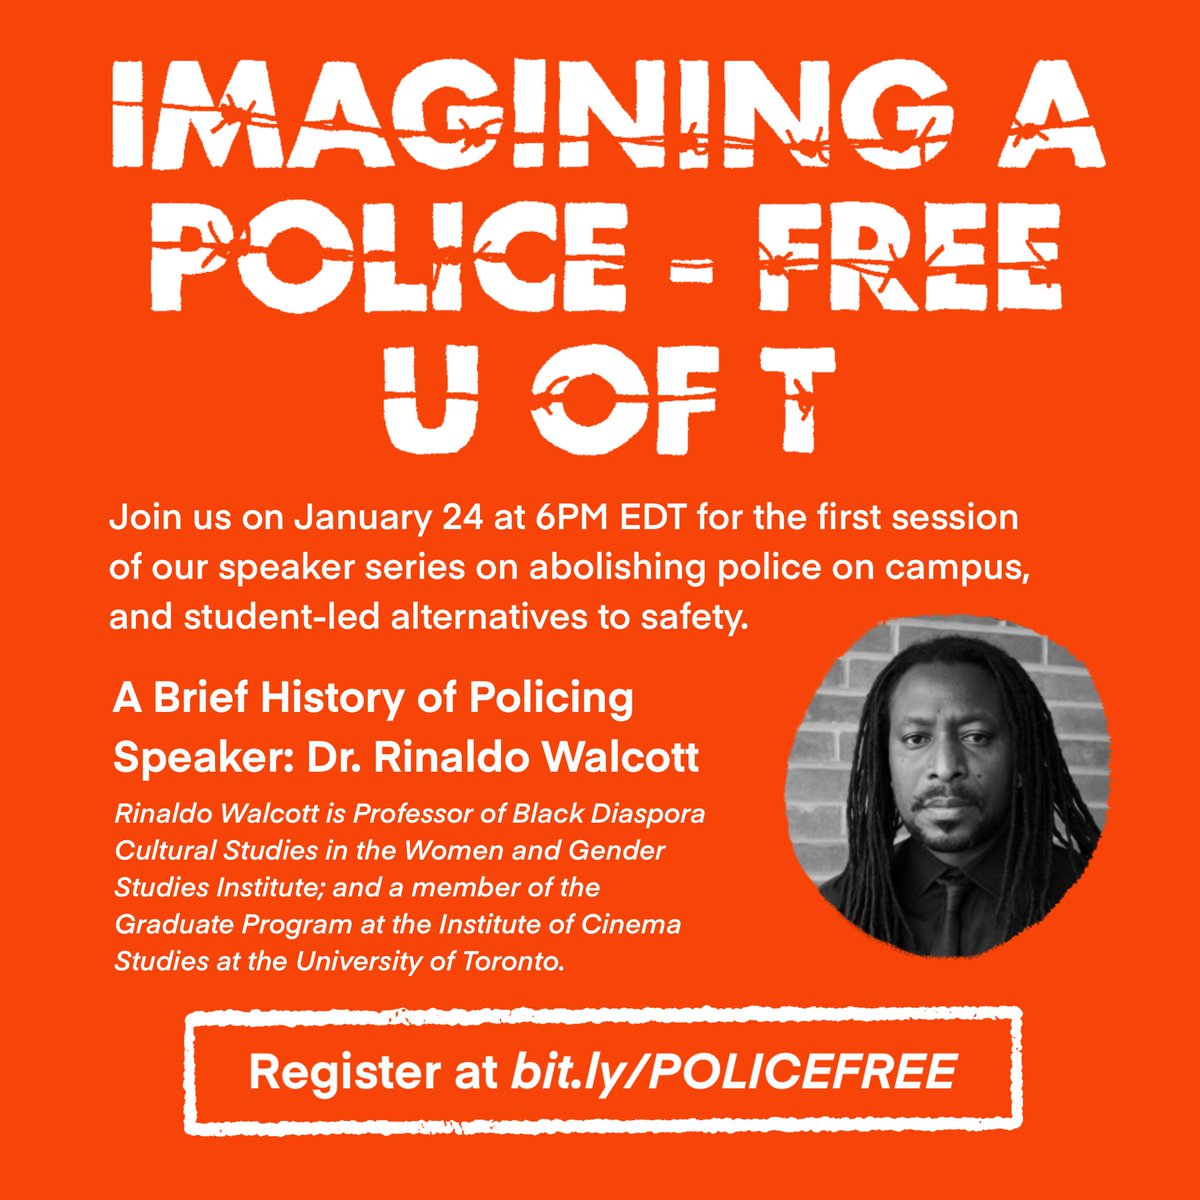 📢HAPPENING TODAY📢

THE FIRST SESSION OF THE 'IMAGINING A POLICE-FREE UofT' SERIES AS WE BEGIN TO ORGANIZE AROUND ABOLISHING POLICE AT UofT

WITH DR. RINALDO WALCOTT (@blacklikewho) AT 6PM EDT TODAY

REGISTER NOW: bit.ly/POLICEFREE

#PoliceFreeSchools #CopsOffCampus